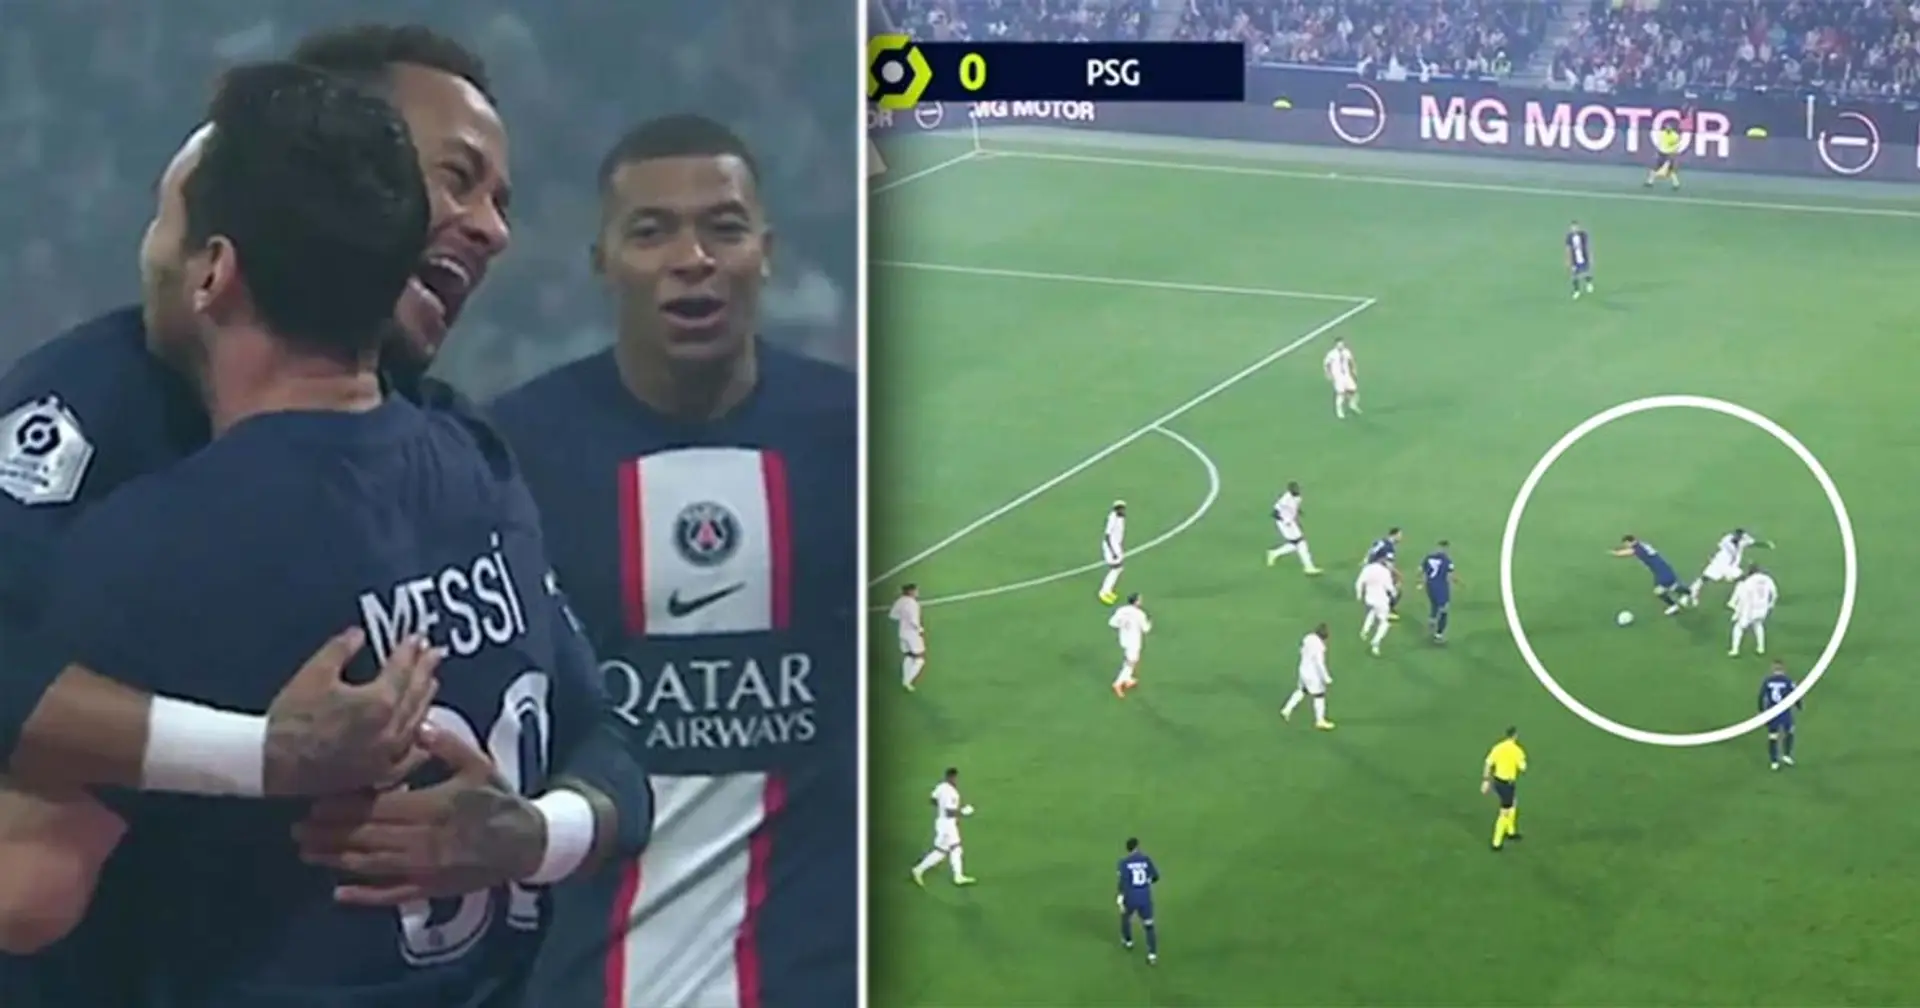 Messi scores fantastic match winner v Lyon, shows special chemistry with Neymar again